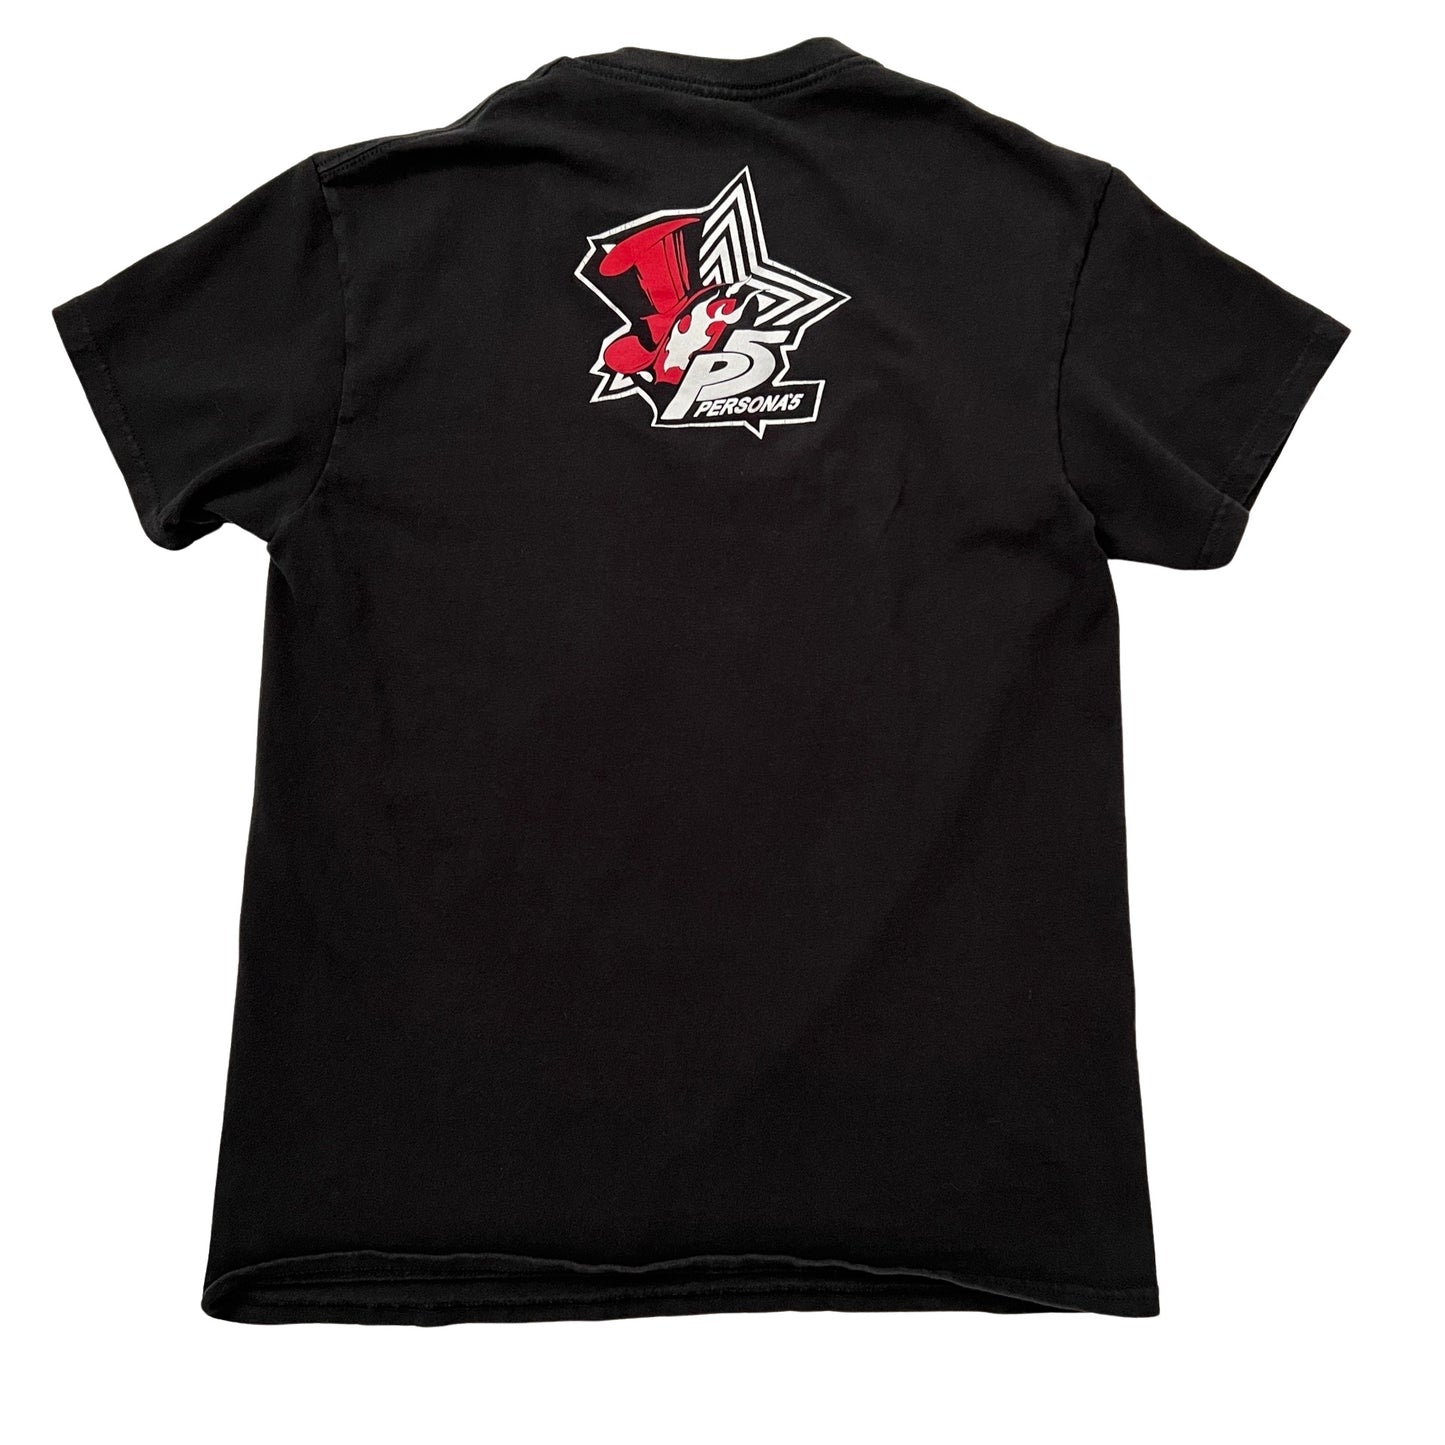 Pre-Owned Persona 5 T-Shirt